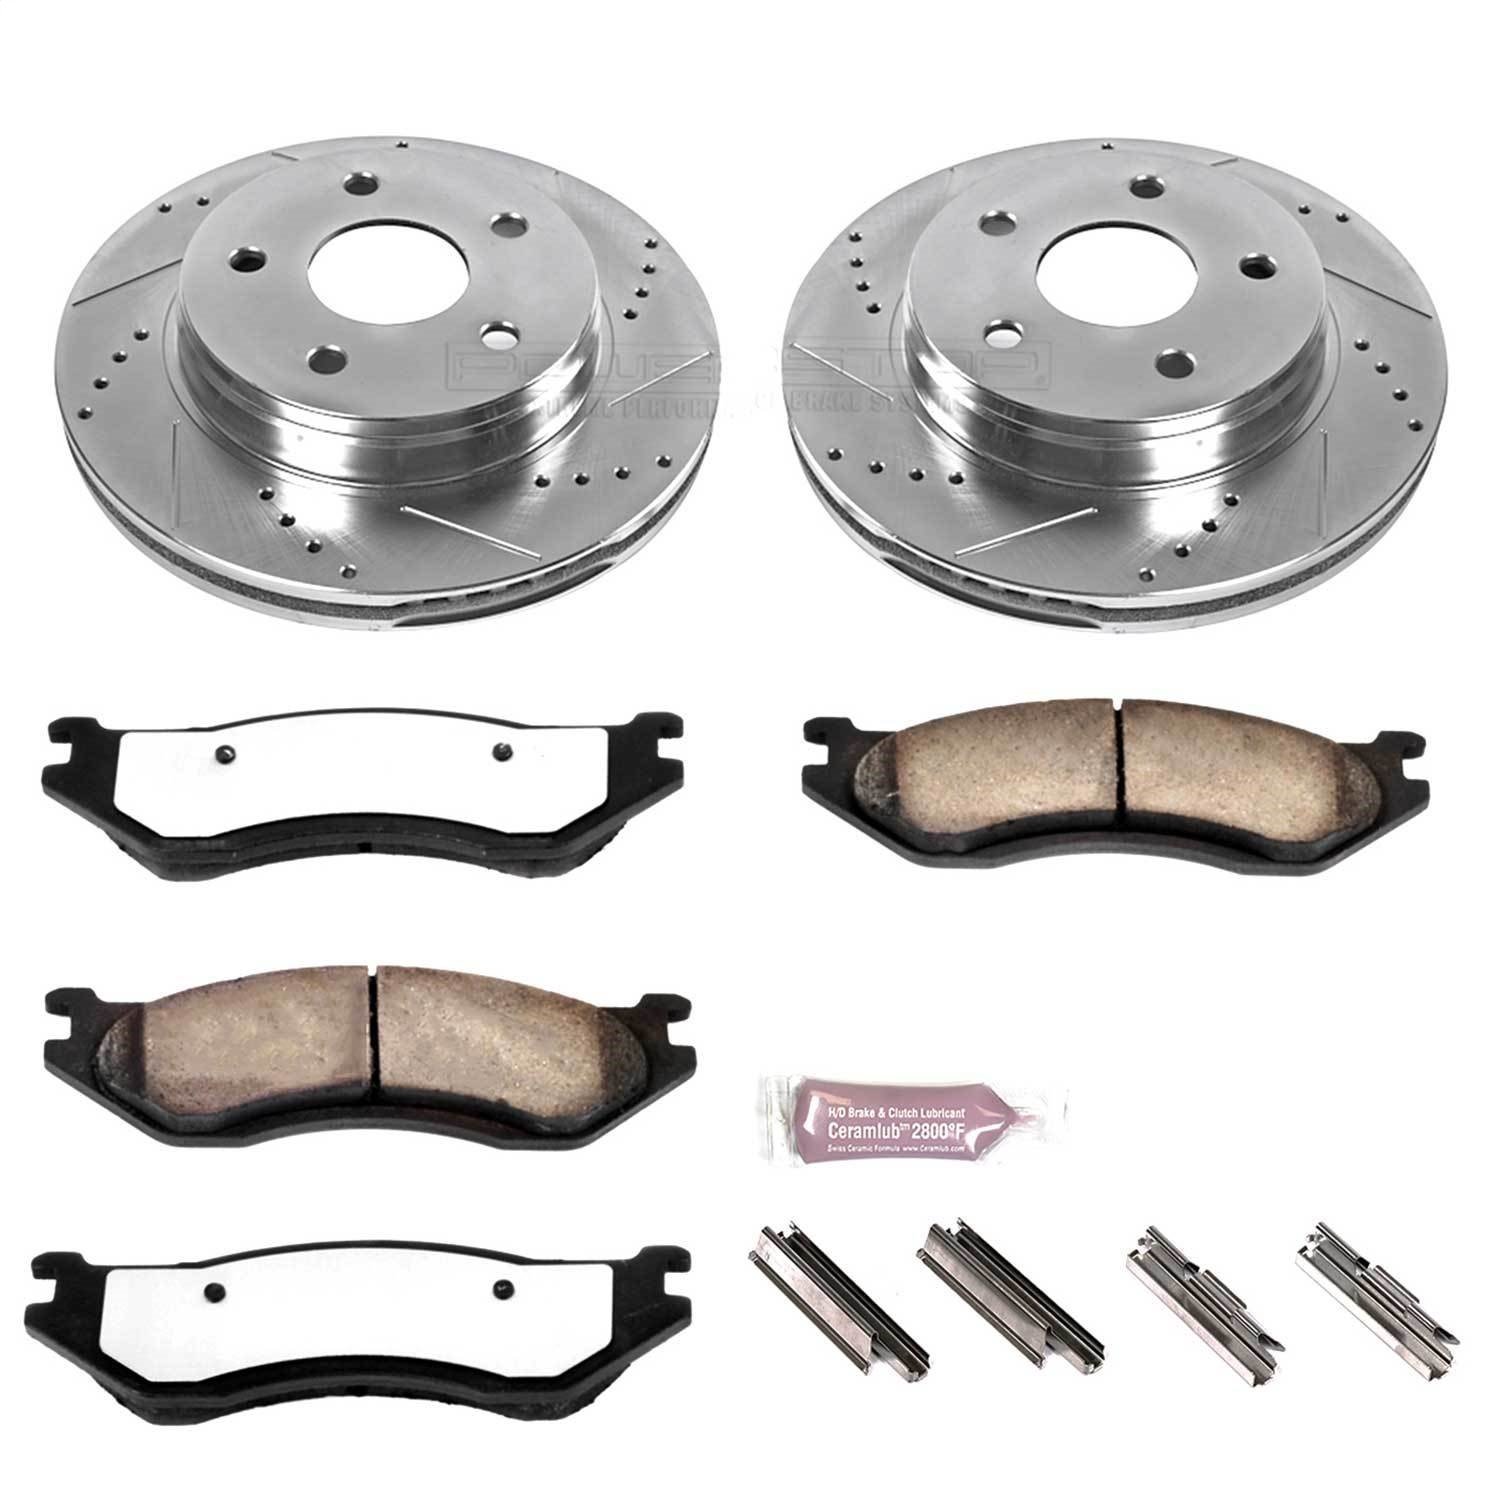 Z36 Front Brake Pads & Rotor Kit for Truck and Tow